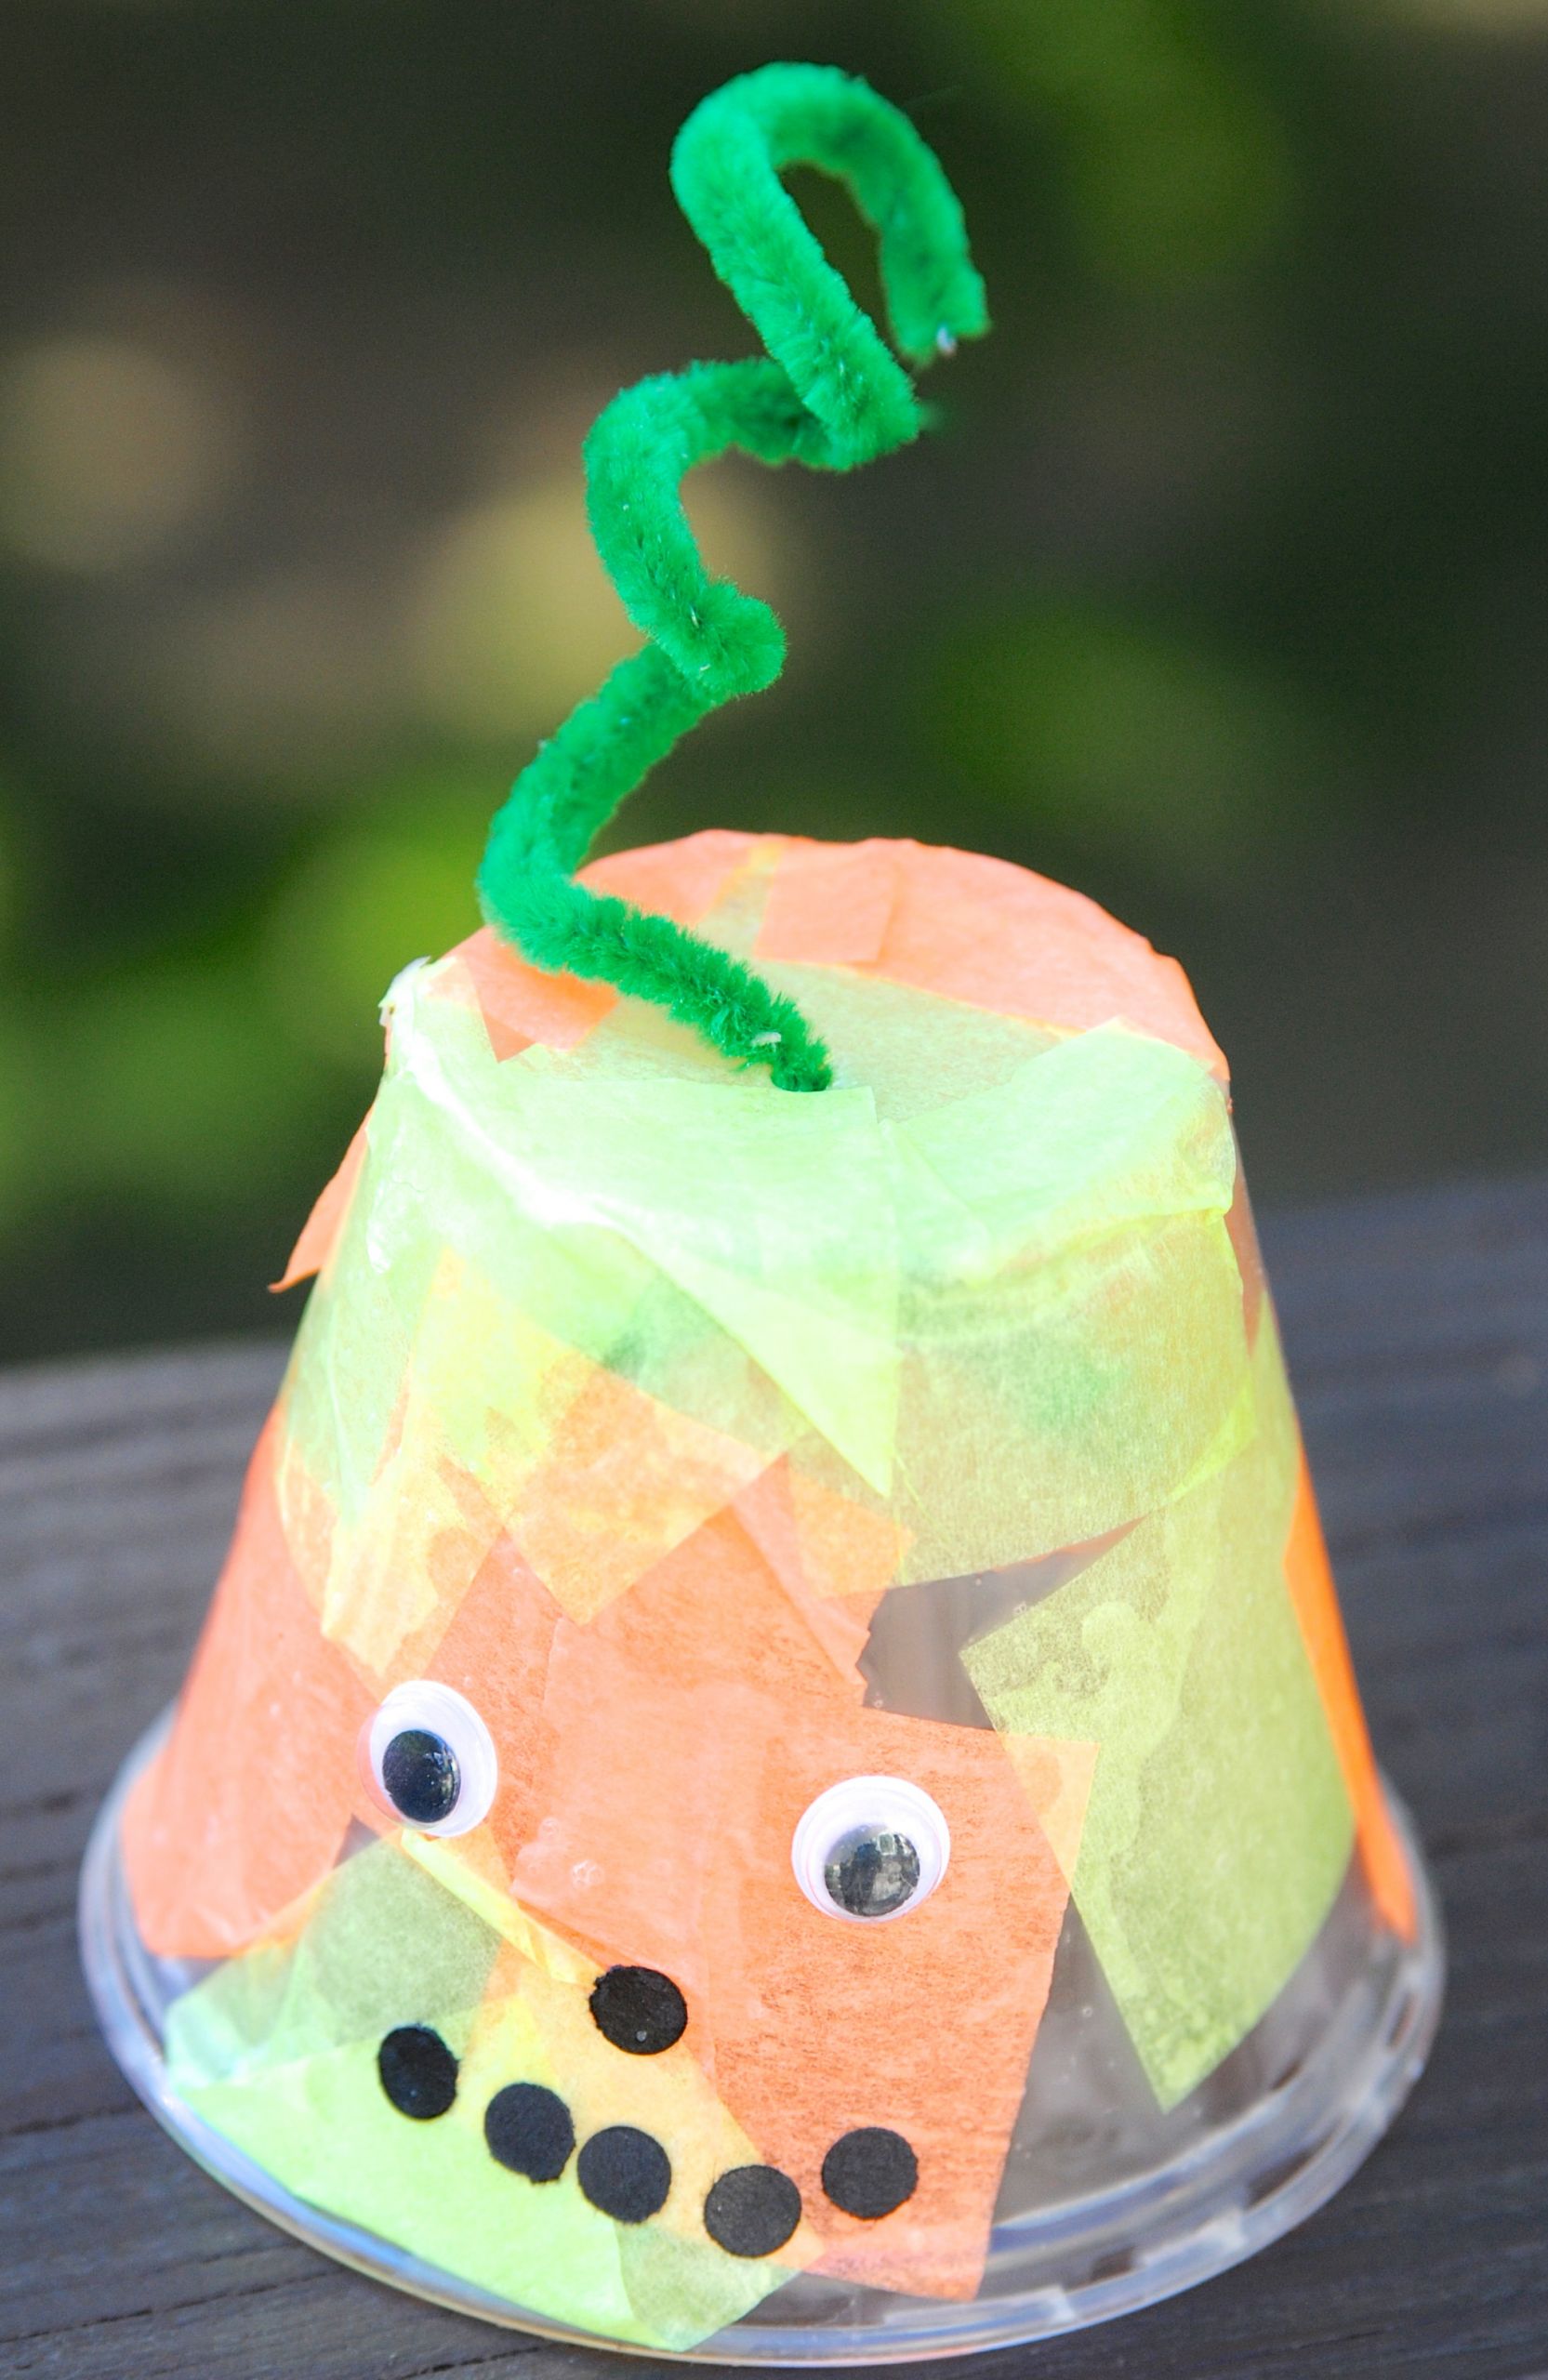 Fun Preschool Crafts
 Cute and Quick Halloween Crafts for Kids